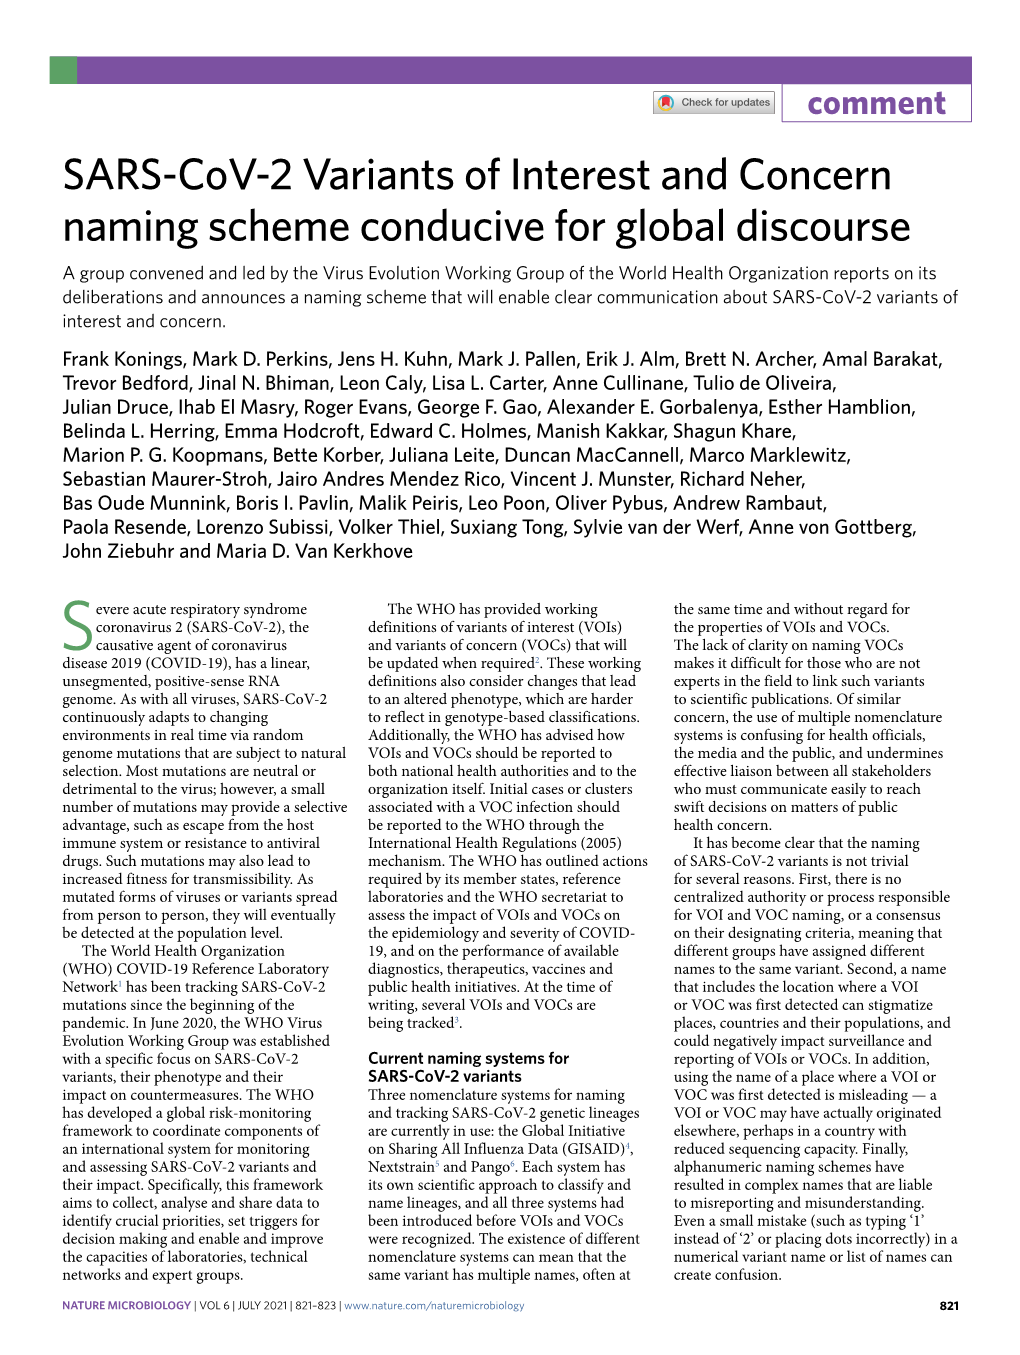 SARS-Cov-2 Variants of Interest and Concern Naming Scheme Conducive for Global Discourse